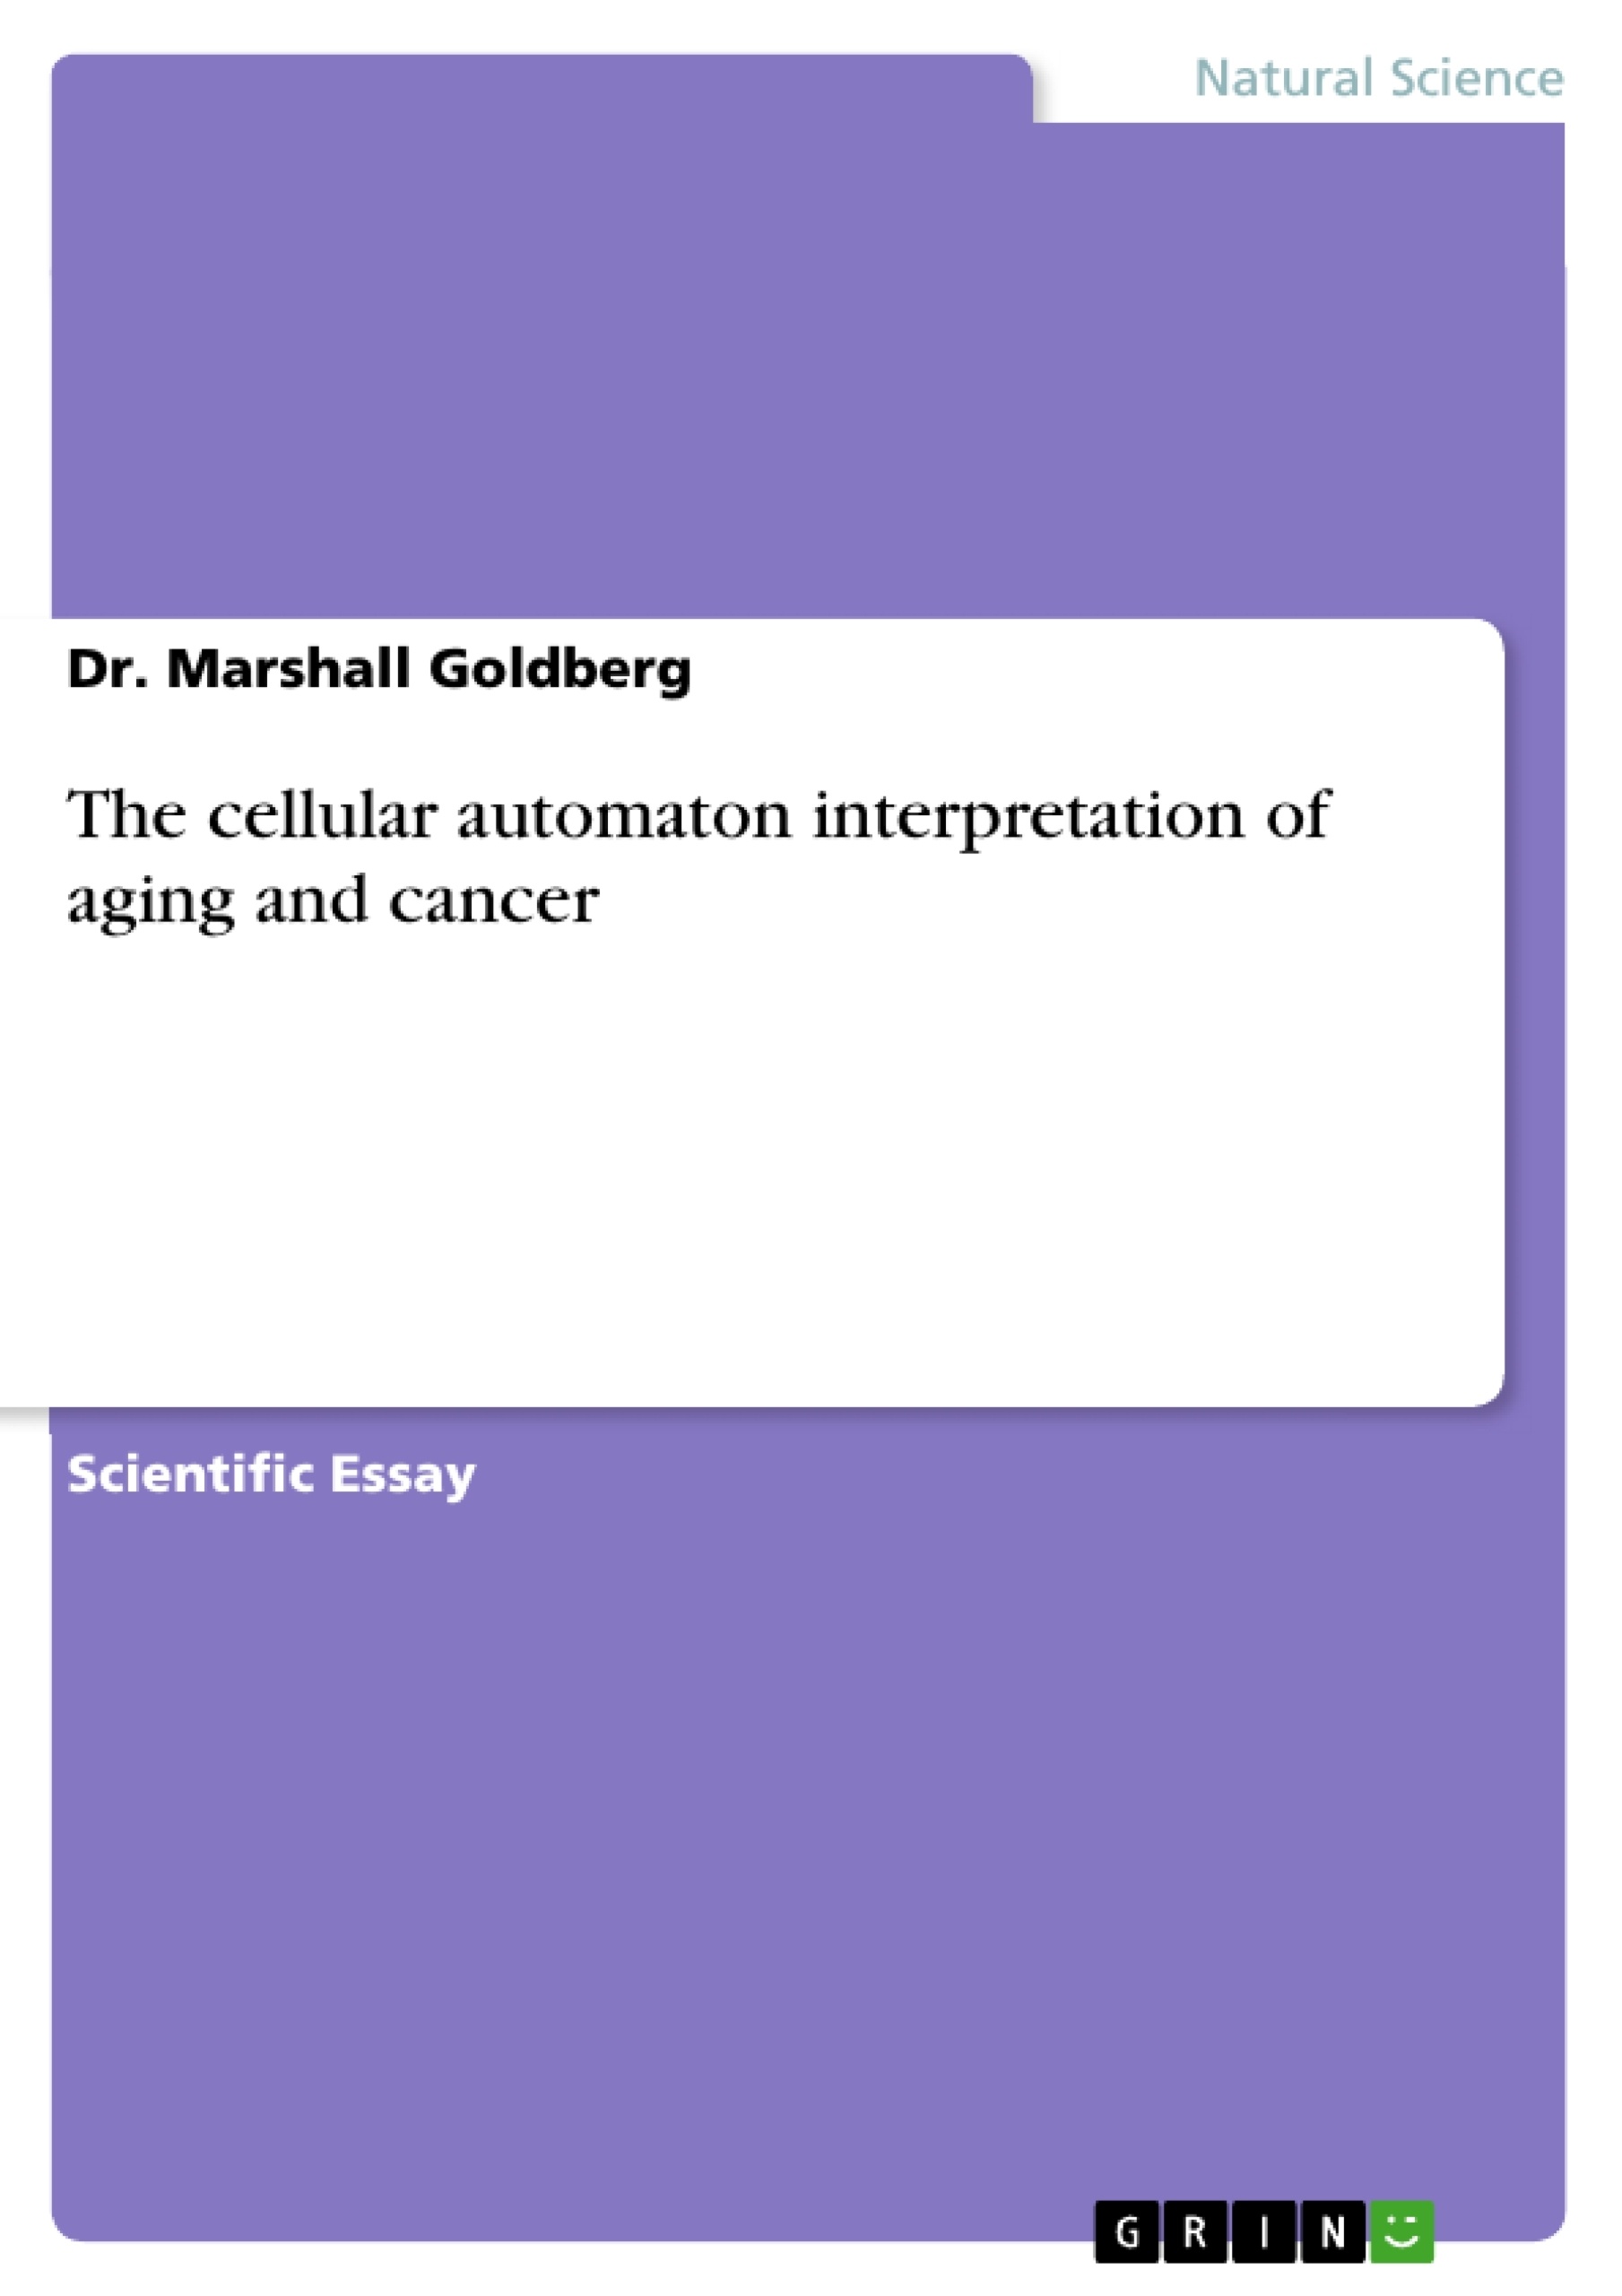 Titre: The cellular automaton interpretation of aging and cancer